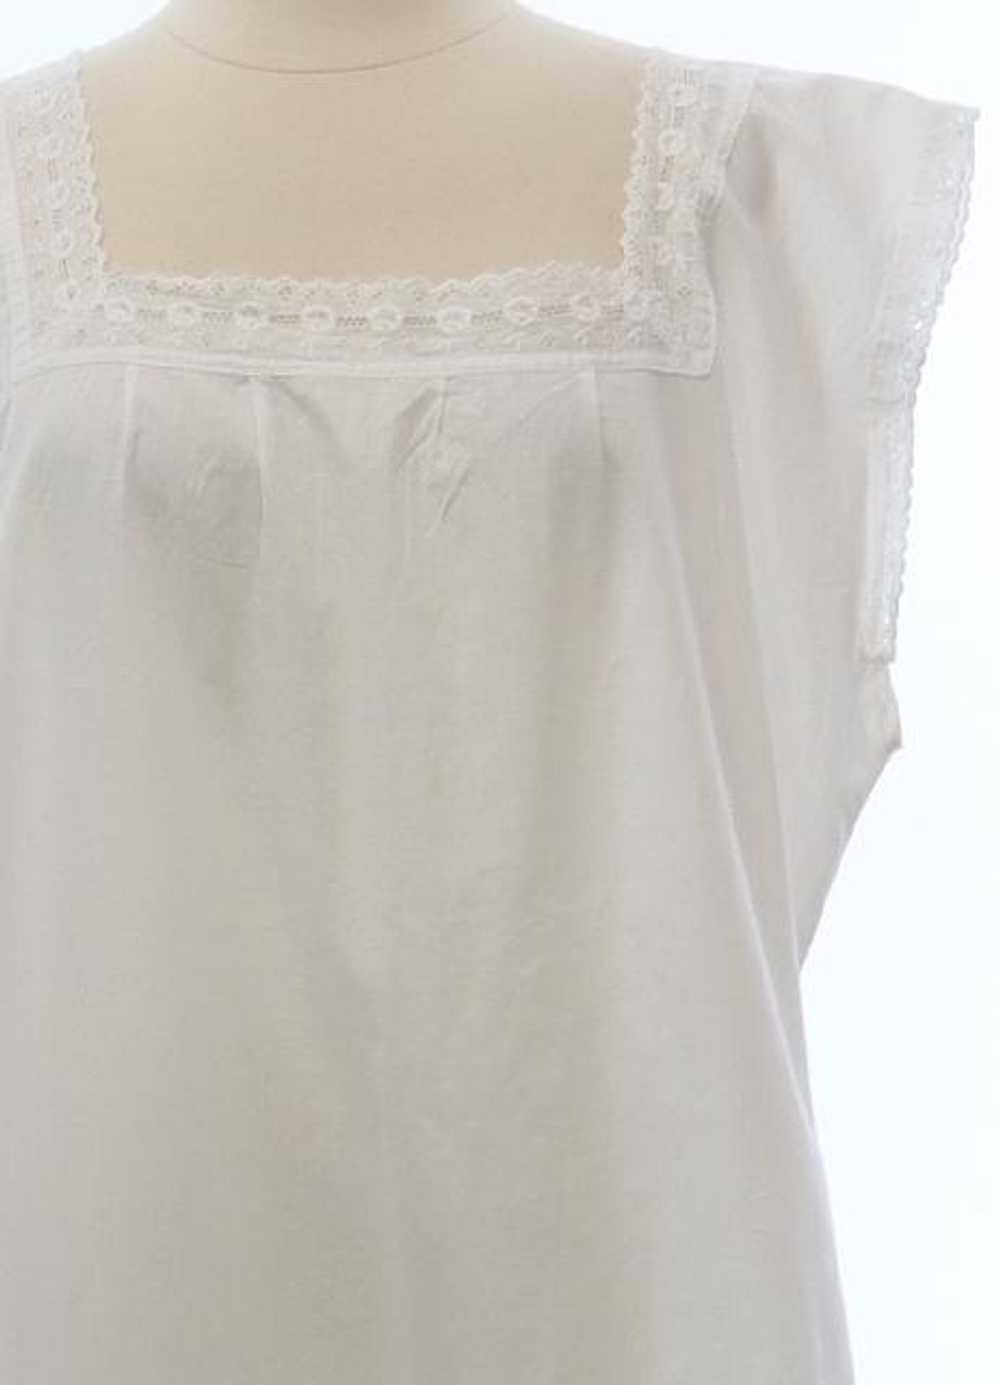 1920's Womens Lingerie - Nightgown - image 2